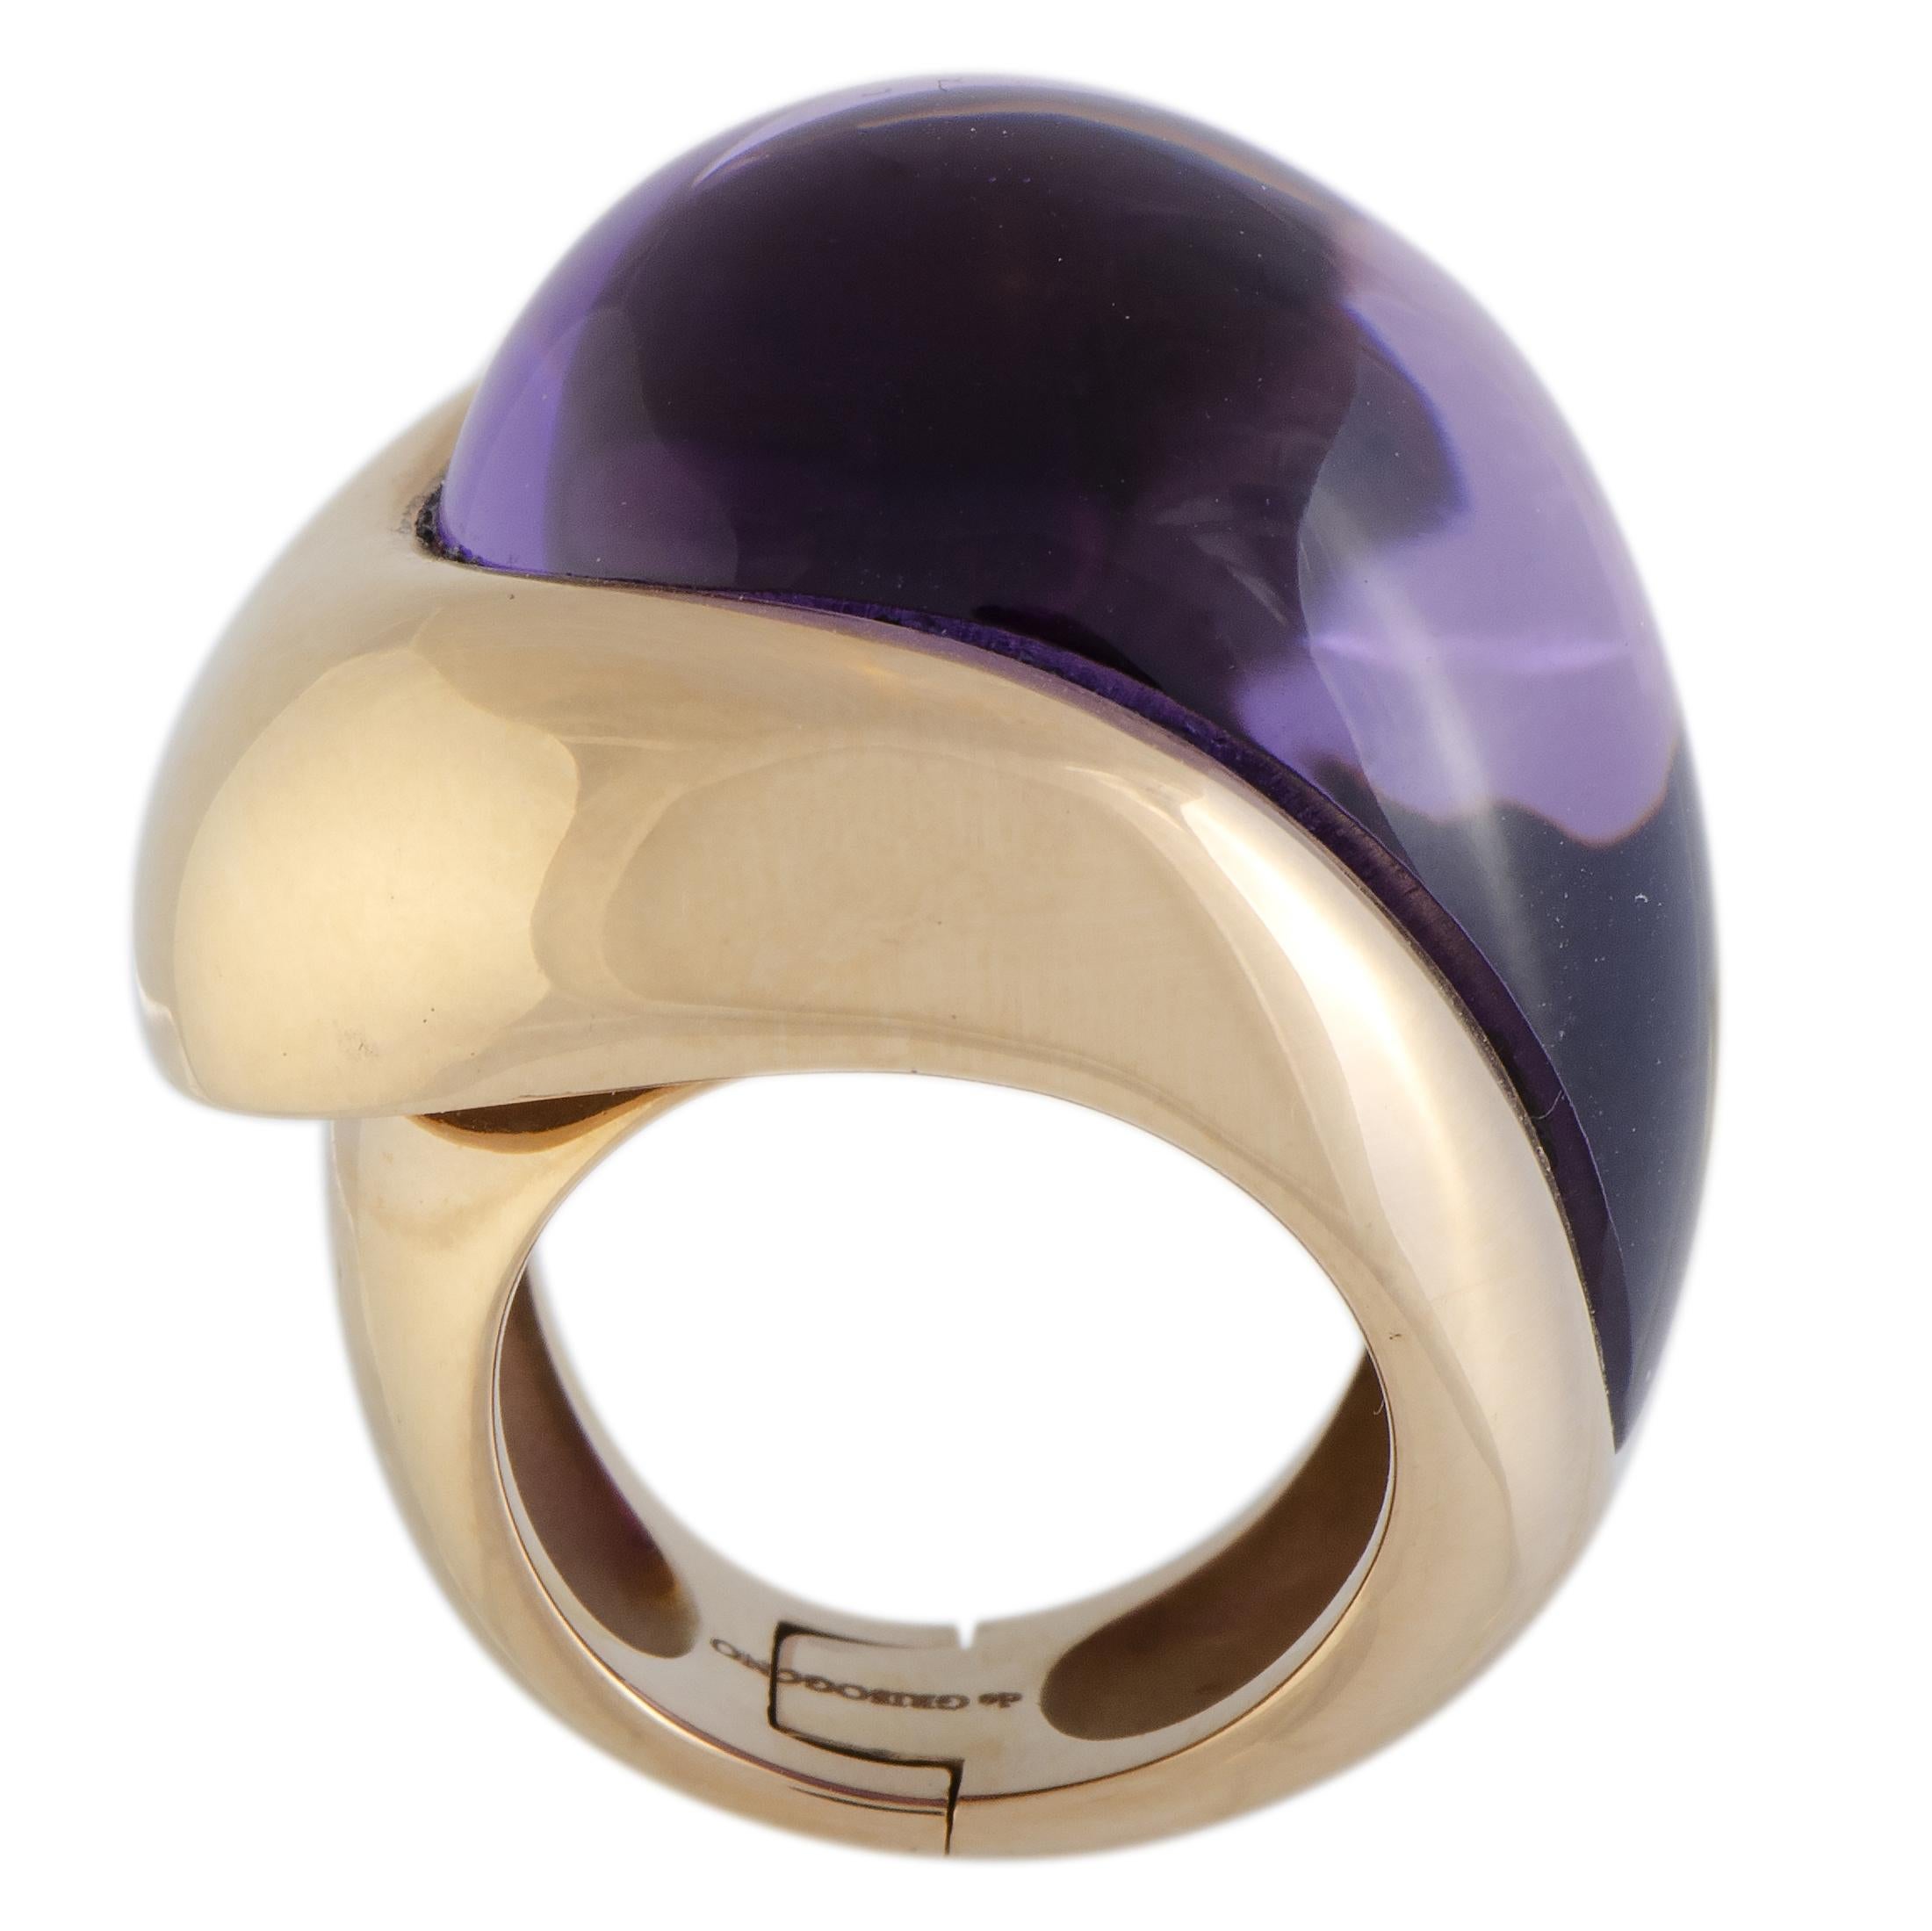 Accentuate your ensembles in a compellingly fashionable manner with this fabulous jewelry piece that boasts eye-catching unconventional design and exquisite craftsmanship quality. The ring is presented by de Grisogono and it is wonderfully made of